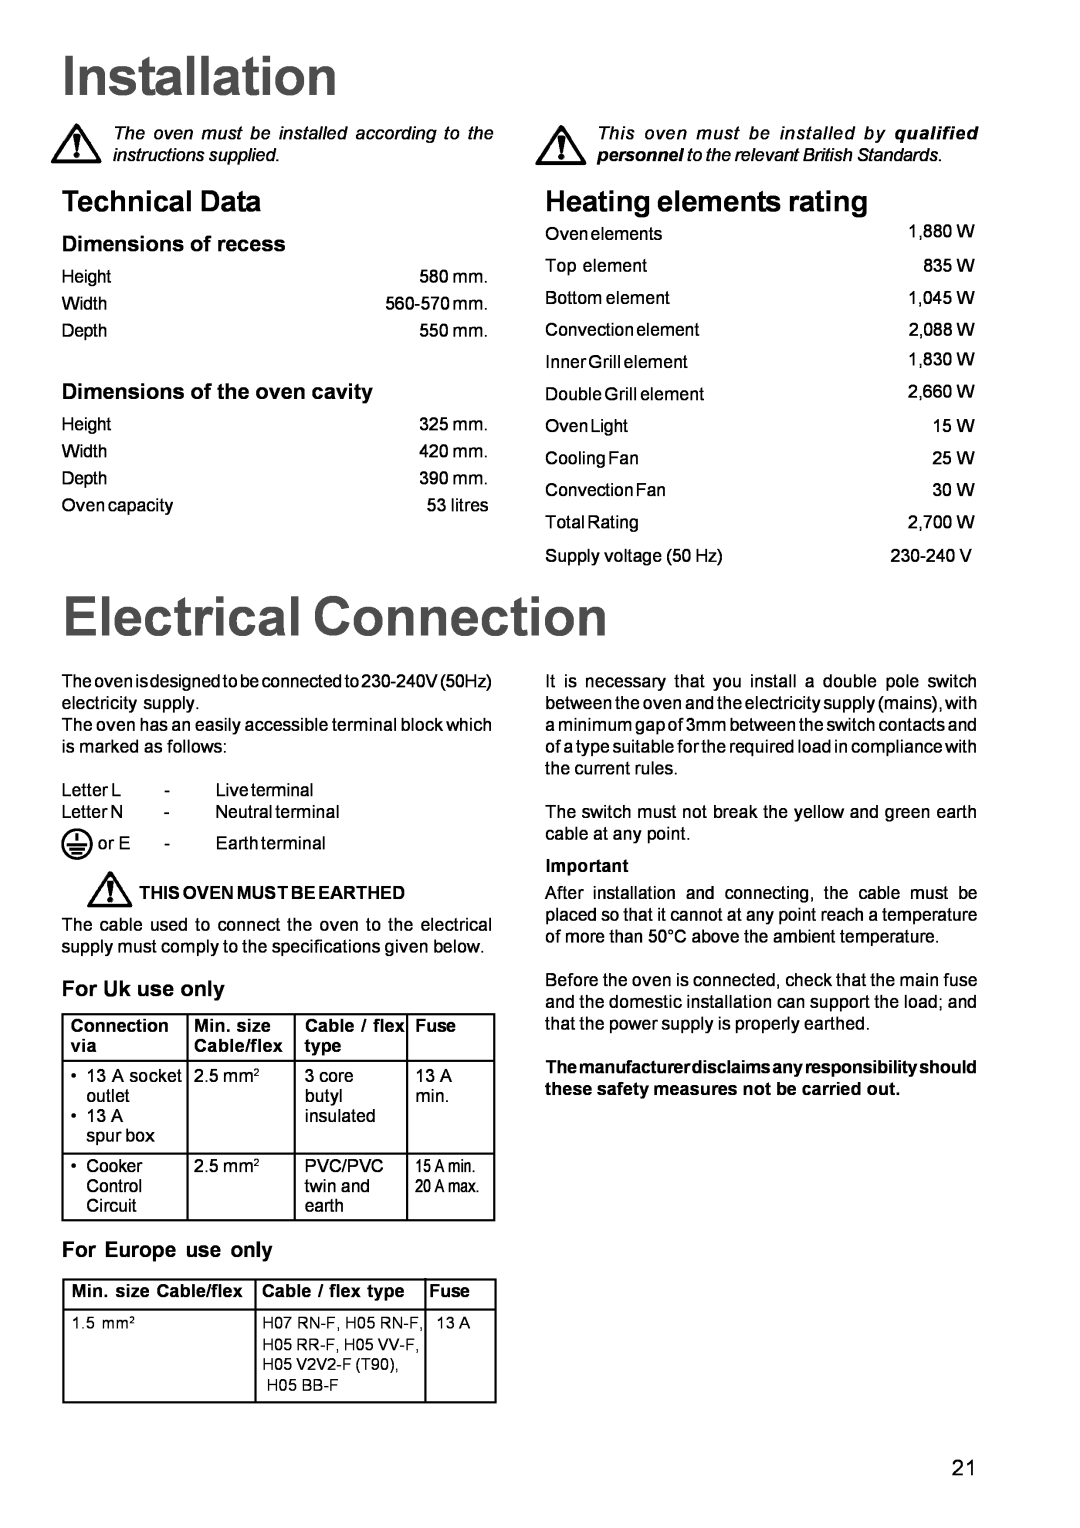 Zanussi ZBQ 665 manual Installation, Electrical Connection, Technical Data, Heating elements rating, Dimensions of recess 